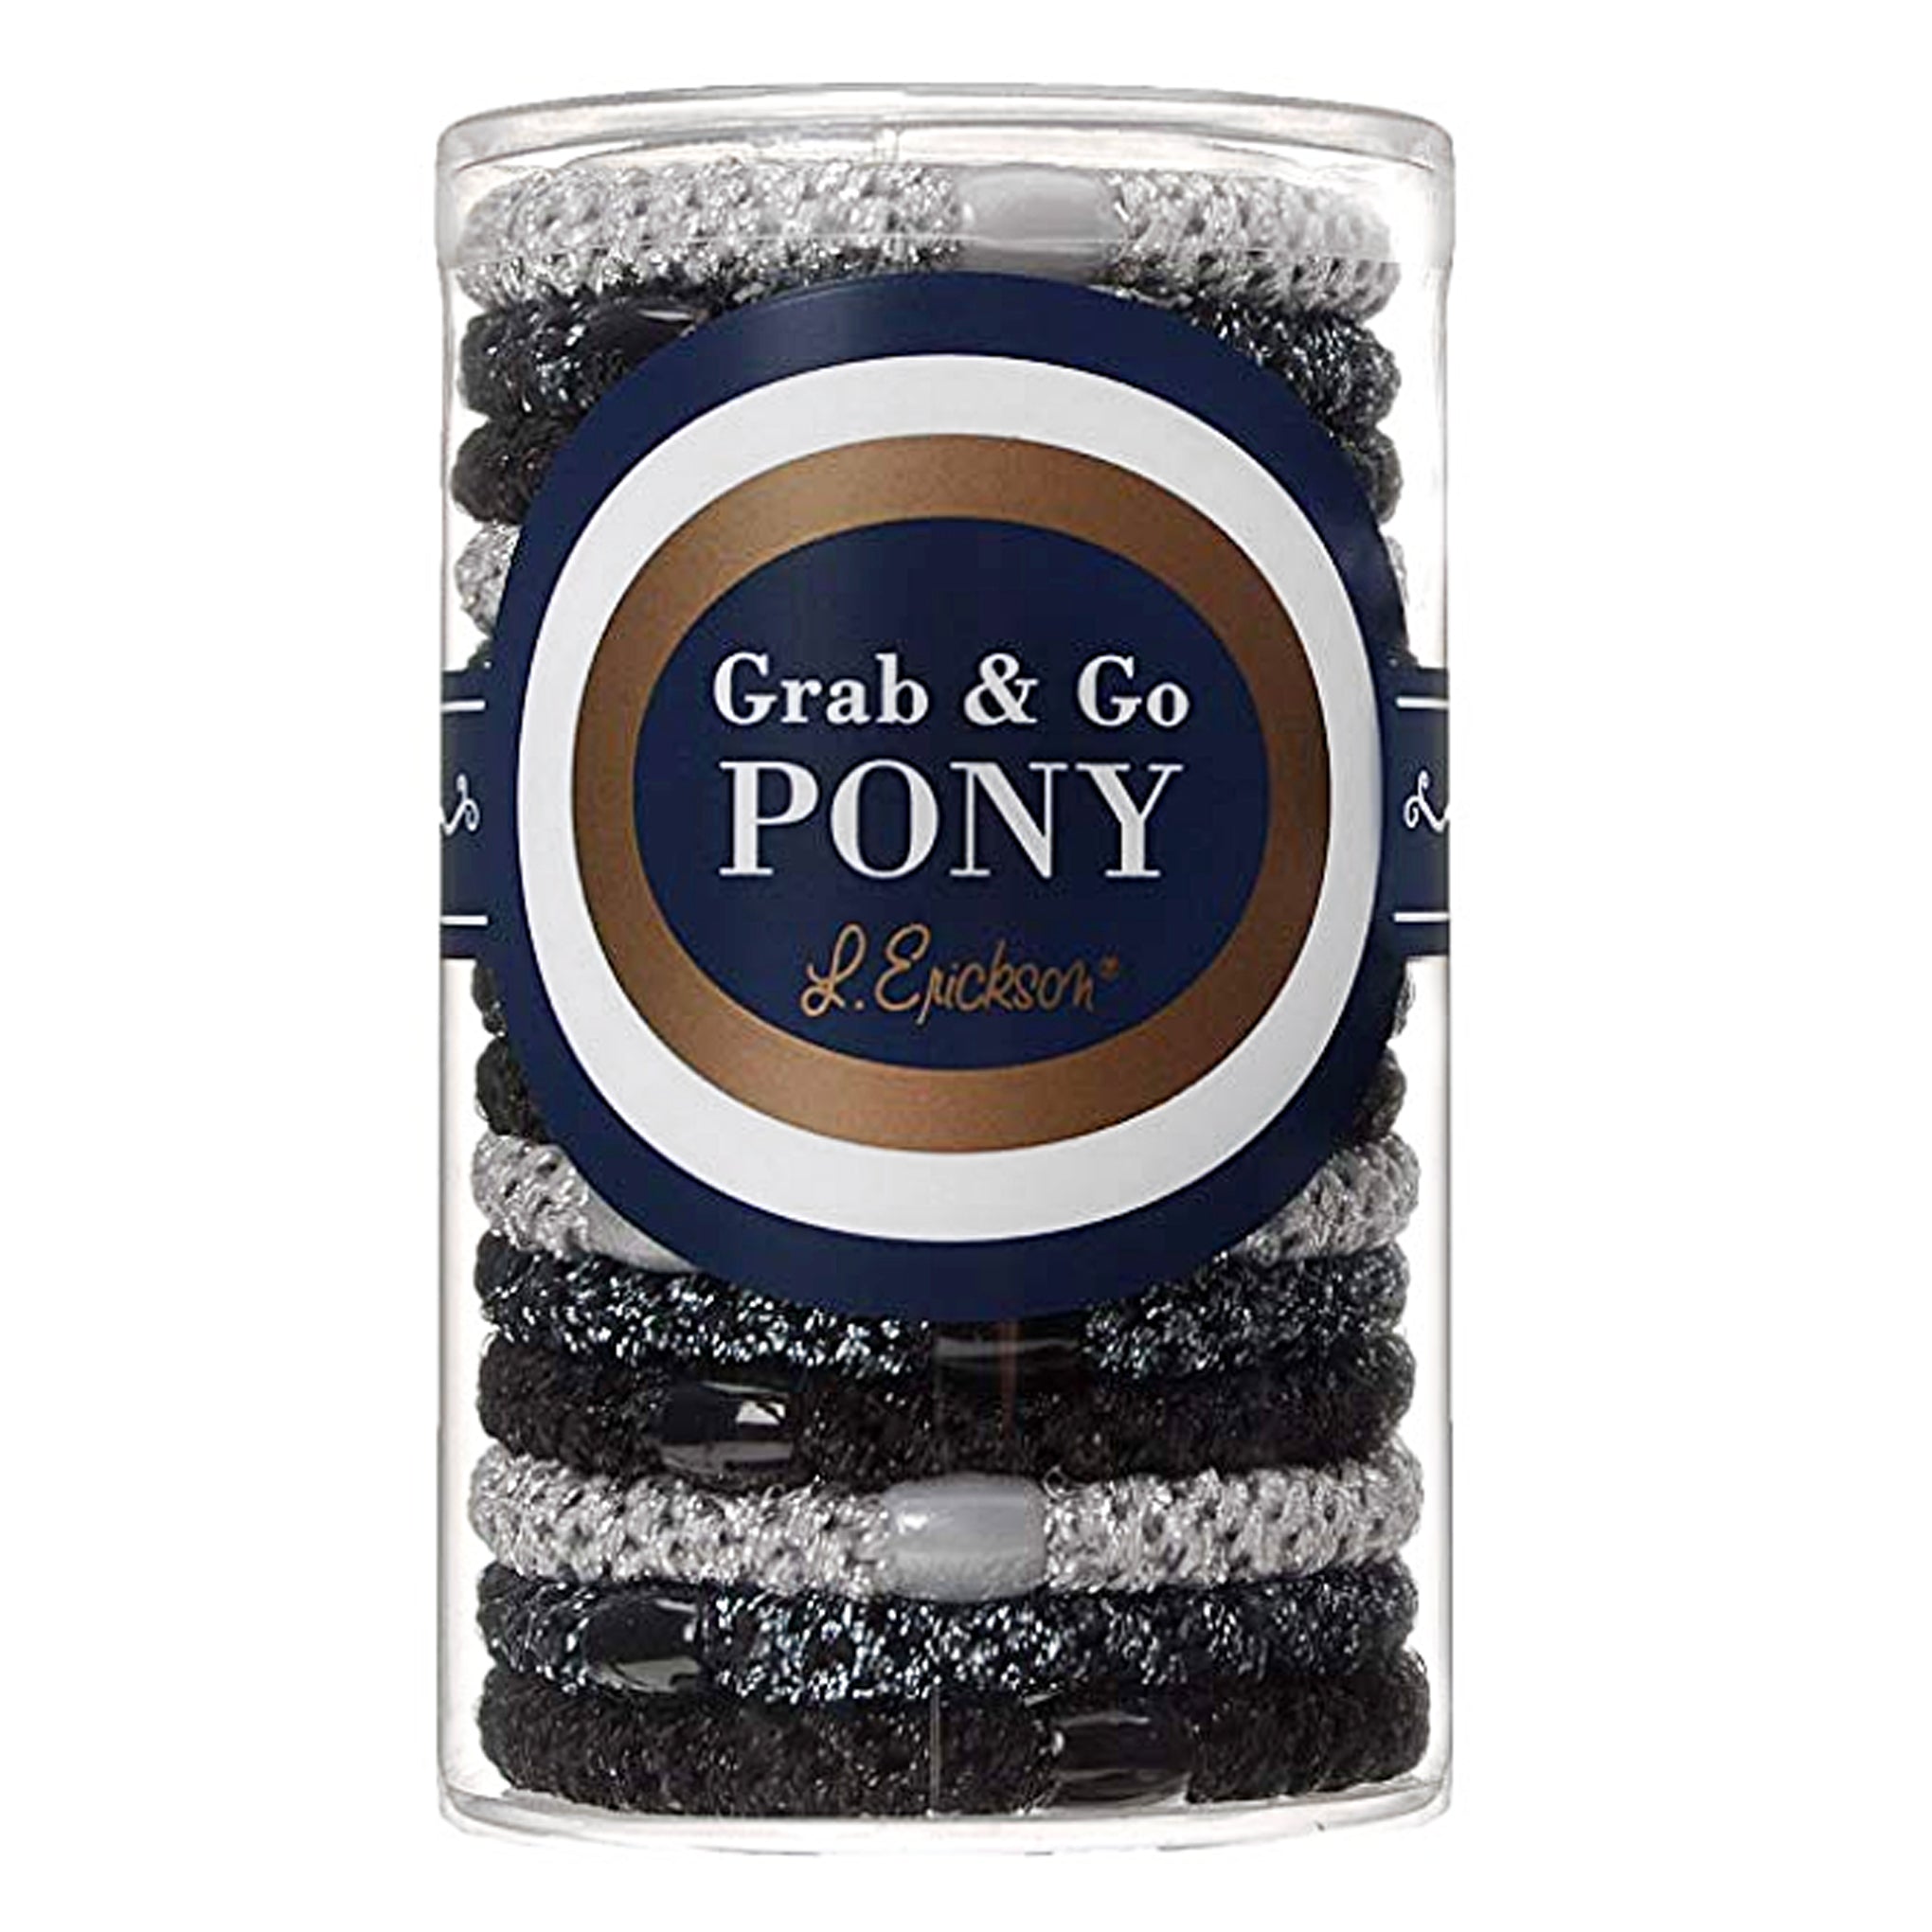 image of L. Erickson Grab and Go Pony Tube Hair Ties in Black Metallic 15 Pack in gift tube